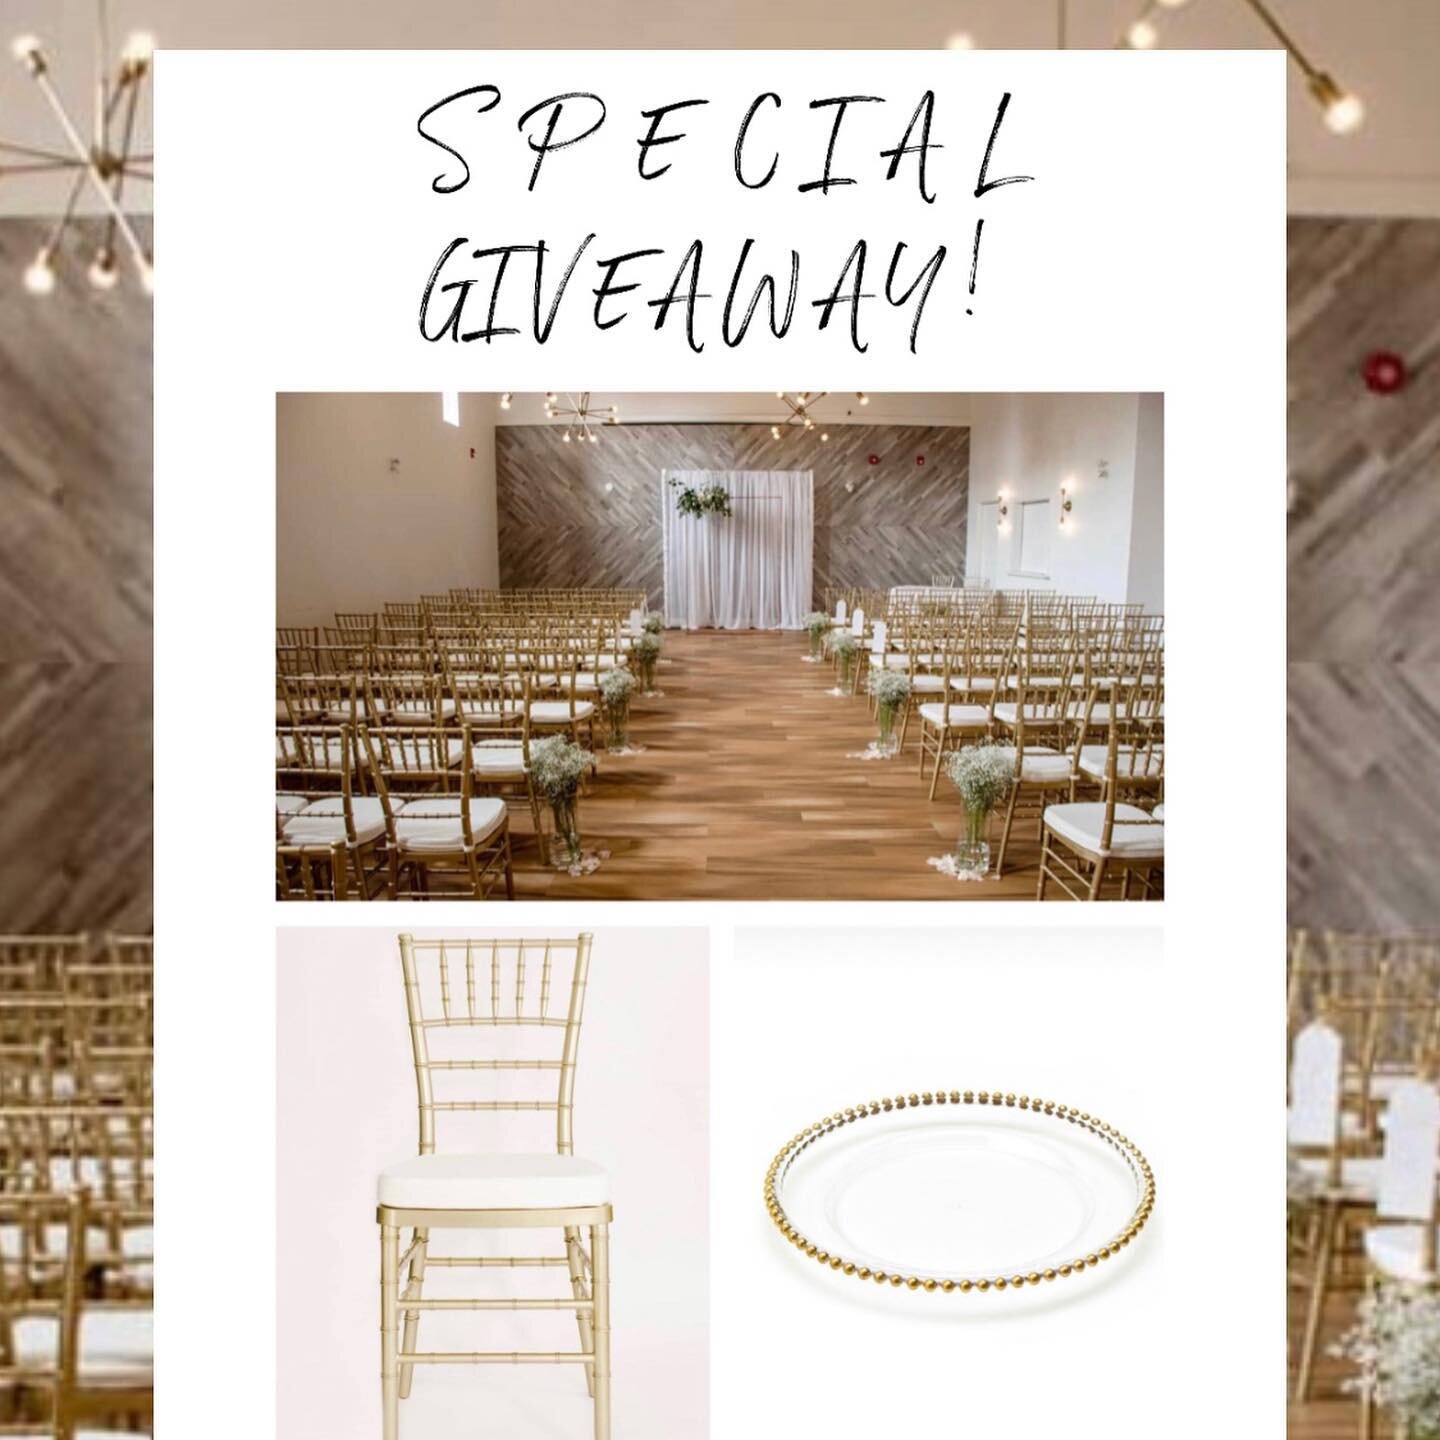 🚨GIVEAWAY ALERT🚨
 ✨VALUE OF 350$✨

LUX EVENT RENTAL TEAM WANTS TO OFFER ONE LUCKY BRIDE AND GROOM TO BE A CHANCE TO WIN A FREE RENTAL OF:

✨3O CHIAVARI GOLD CHAIRS WITH CUSHIONS INCLUDED 

✨3O 12.5&rdquo; GOLD BEADED GLASS CHARGER PLATES

✨3O SATIN